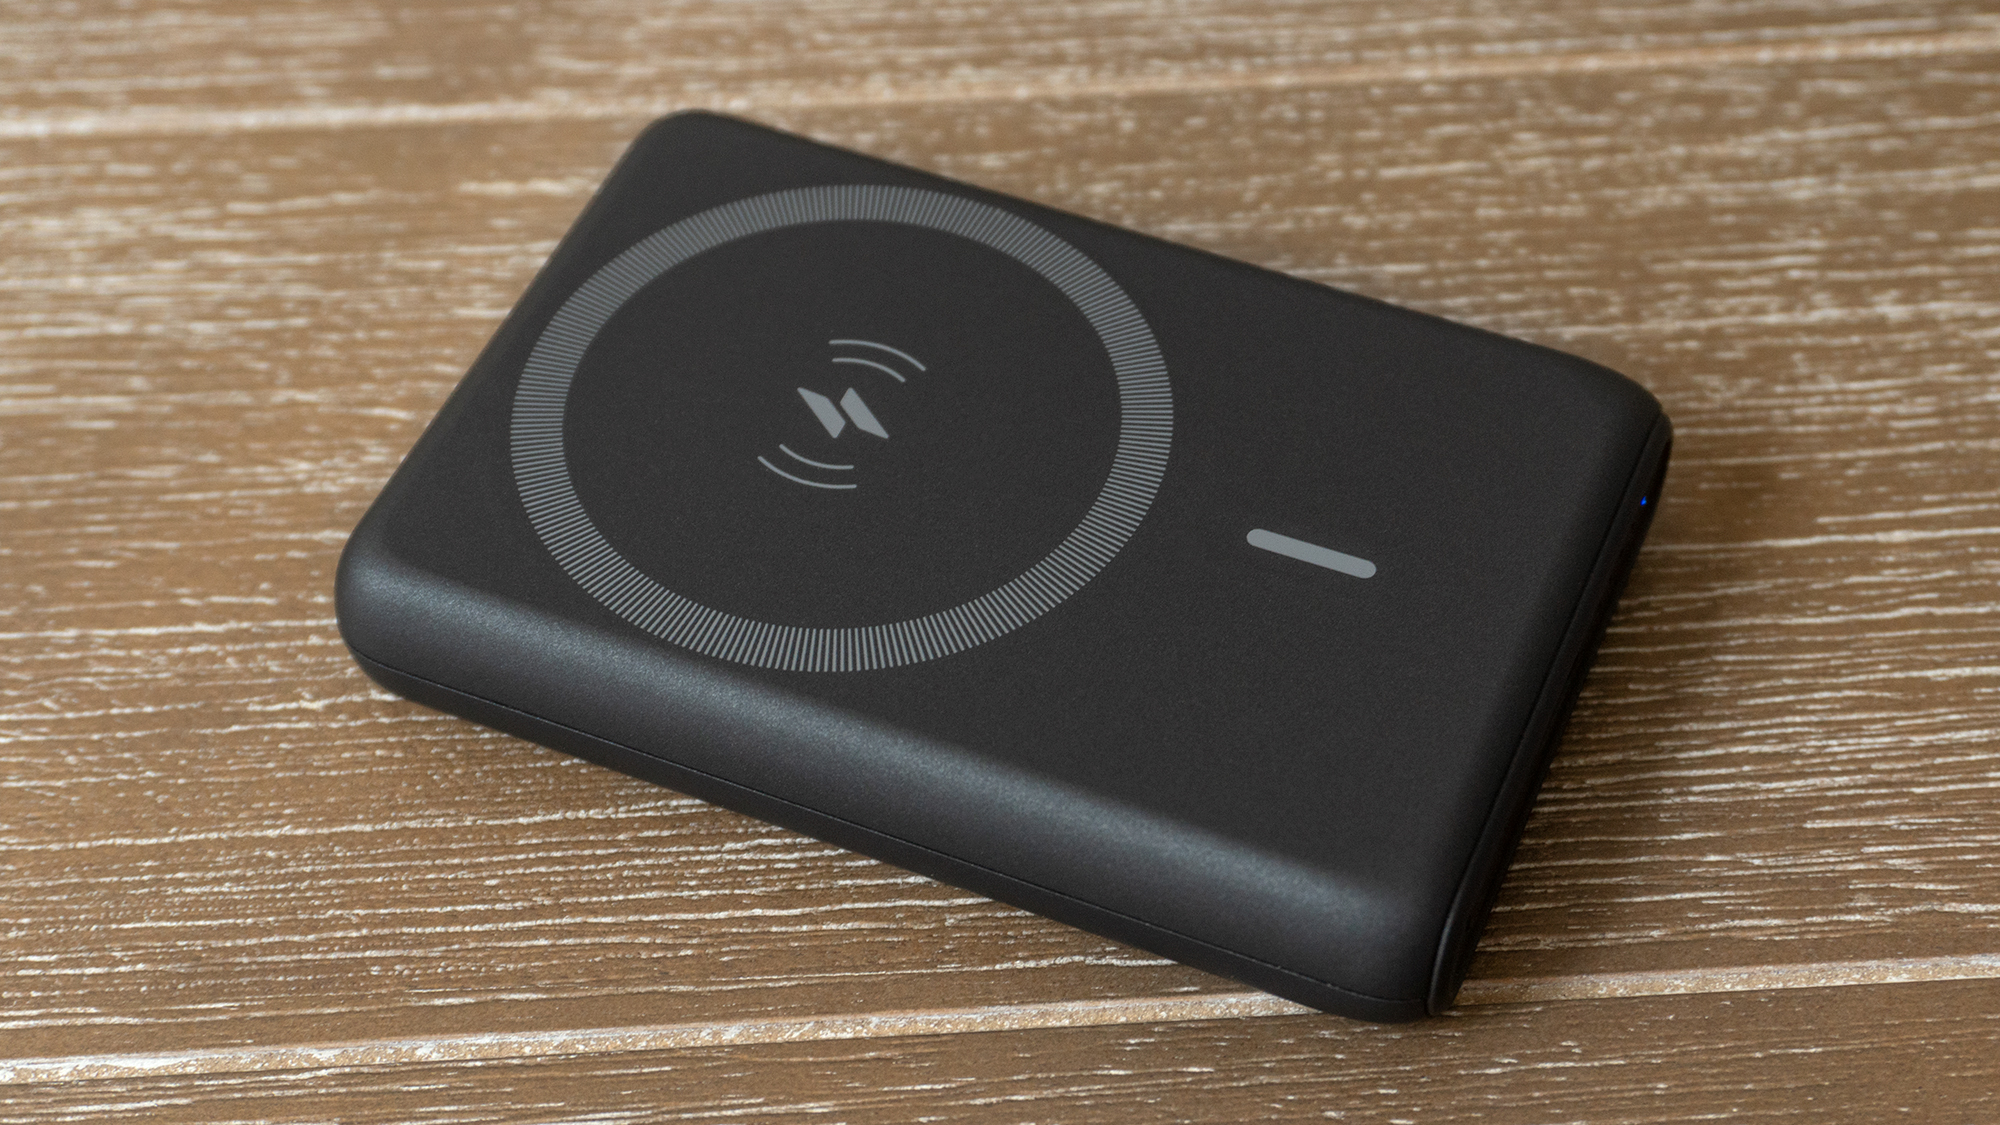 The PowerCore Magnetic 5K can be used to wirelessly charge other devices too, but with just 5W of power transfer it's by no means a fast charging solution. (Photo: Andrew Liszewski/Gizmodo)